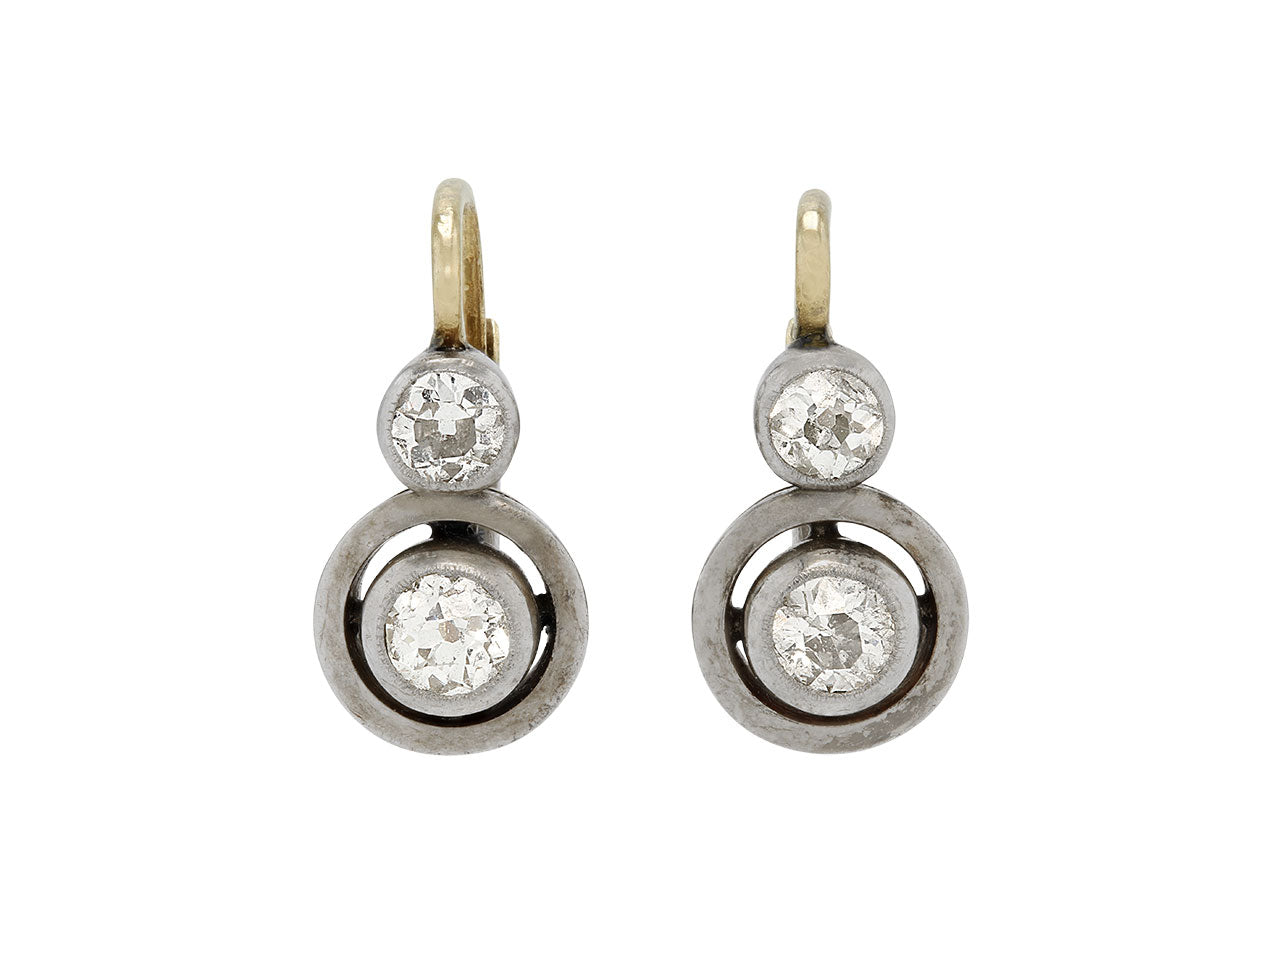 Antique Victorian Old Mine-cut Diamond Earrings in Silver and 14K